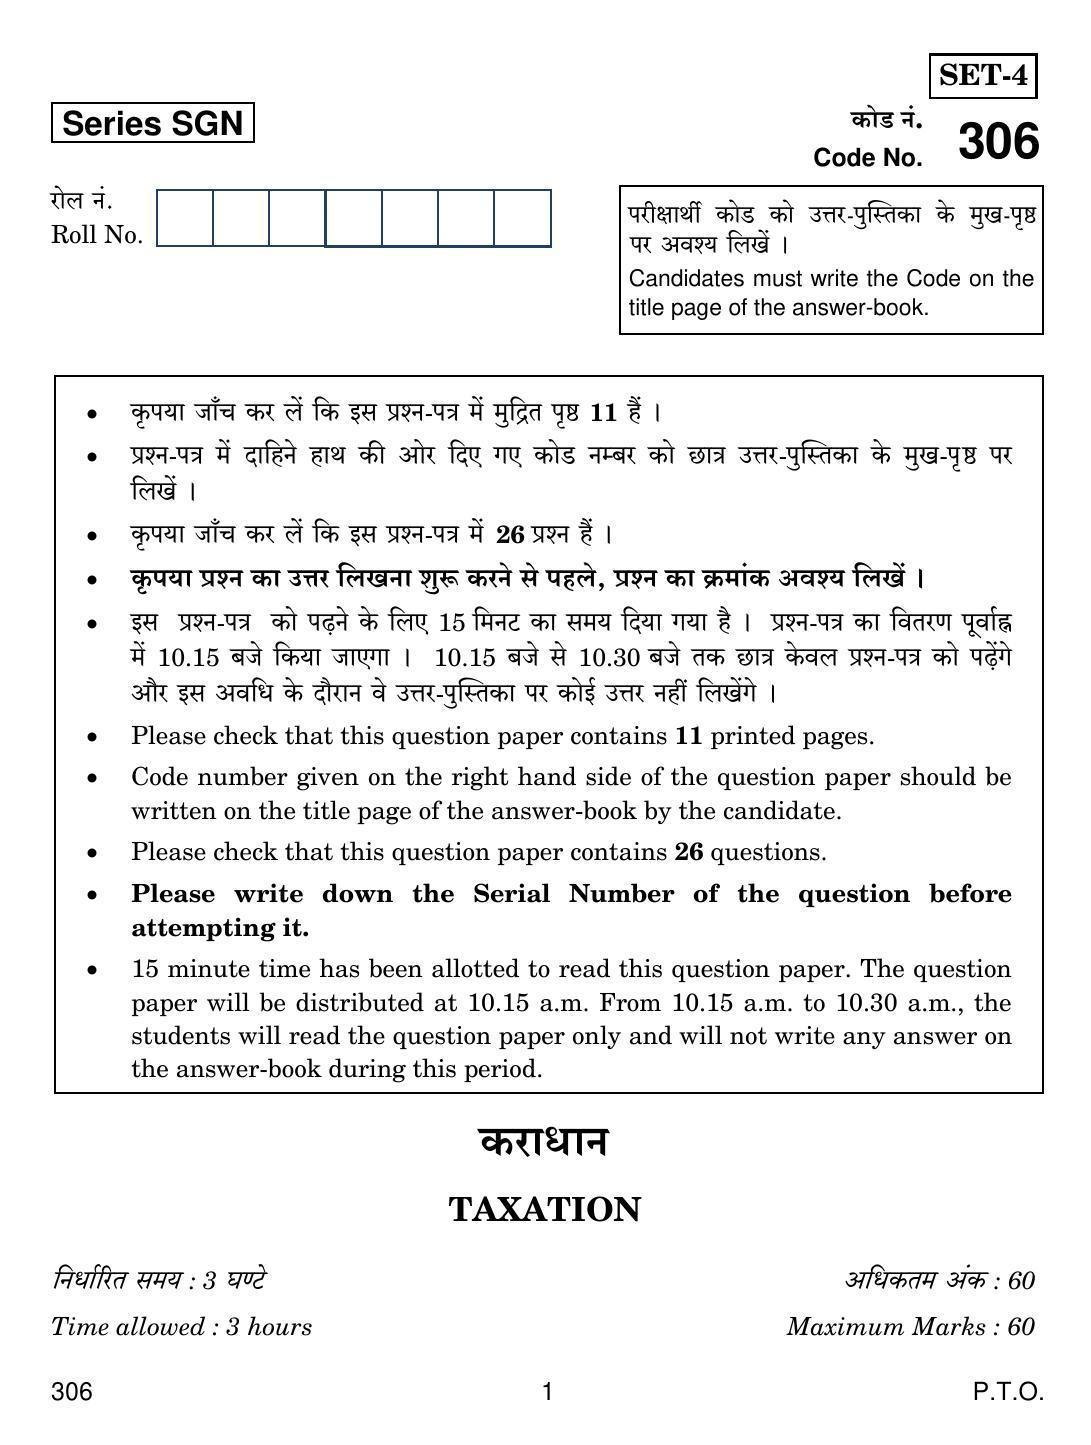 CBSE Class 12 306 TAXATION 2018 Question Paper - Page 1